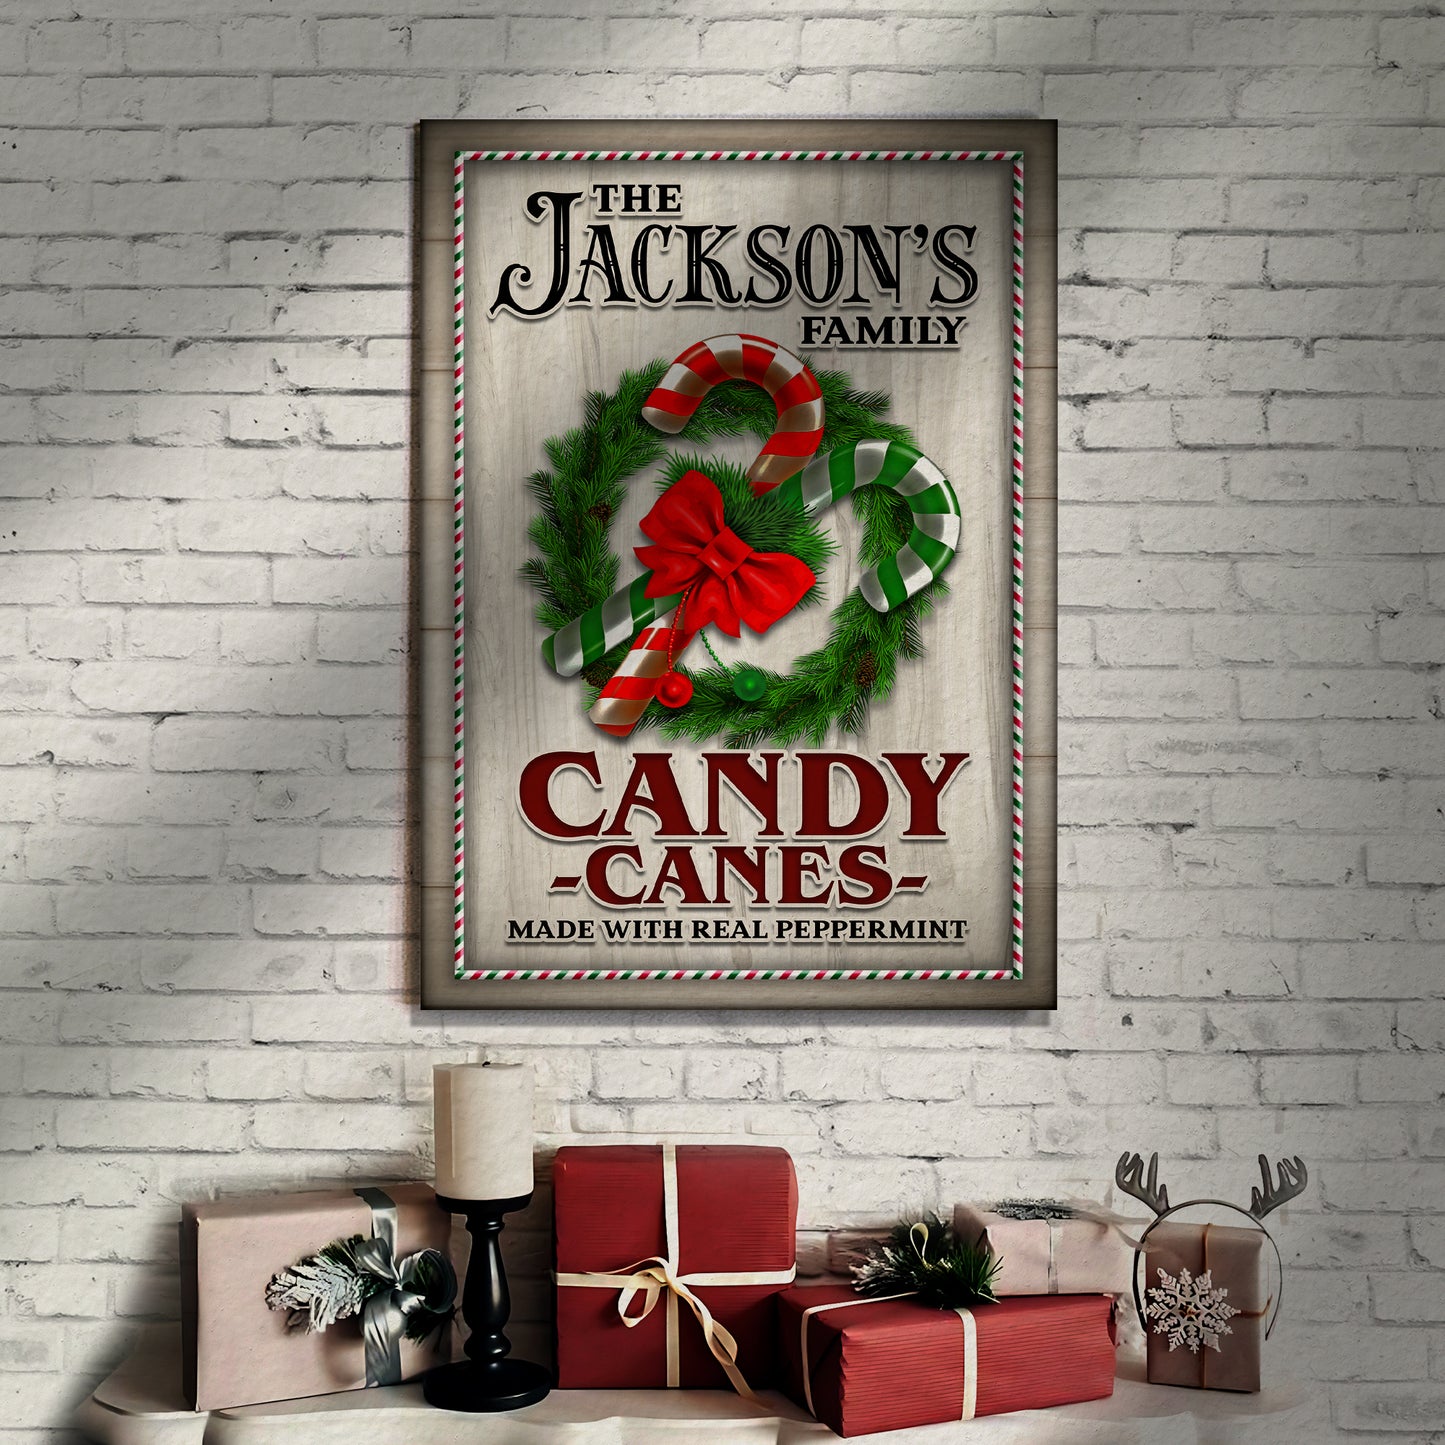 Made With Real Peppermint Candy Canes Sign Style 2 - Image by Tailored Canvases